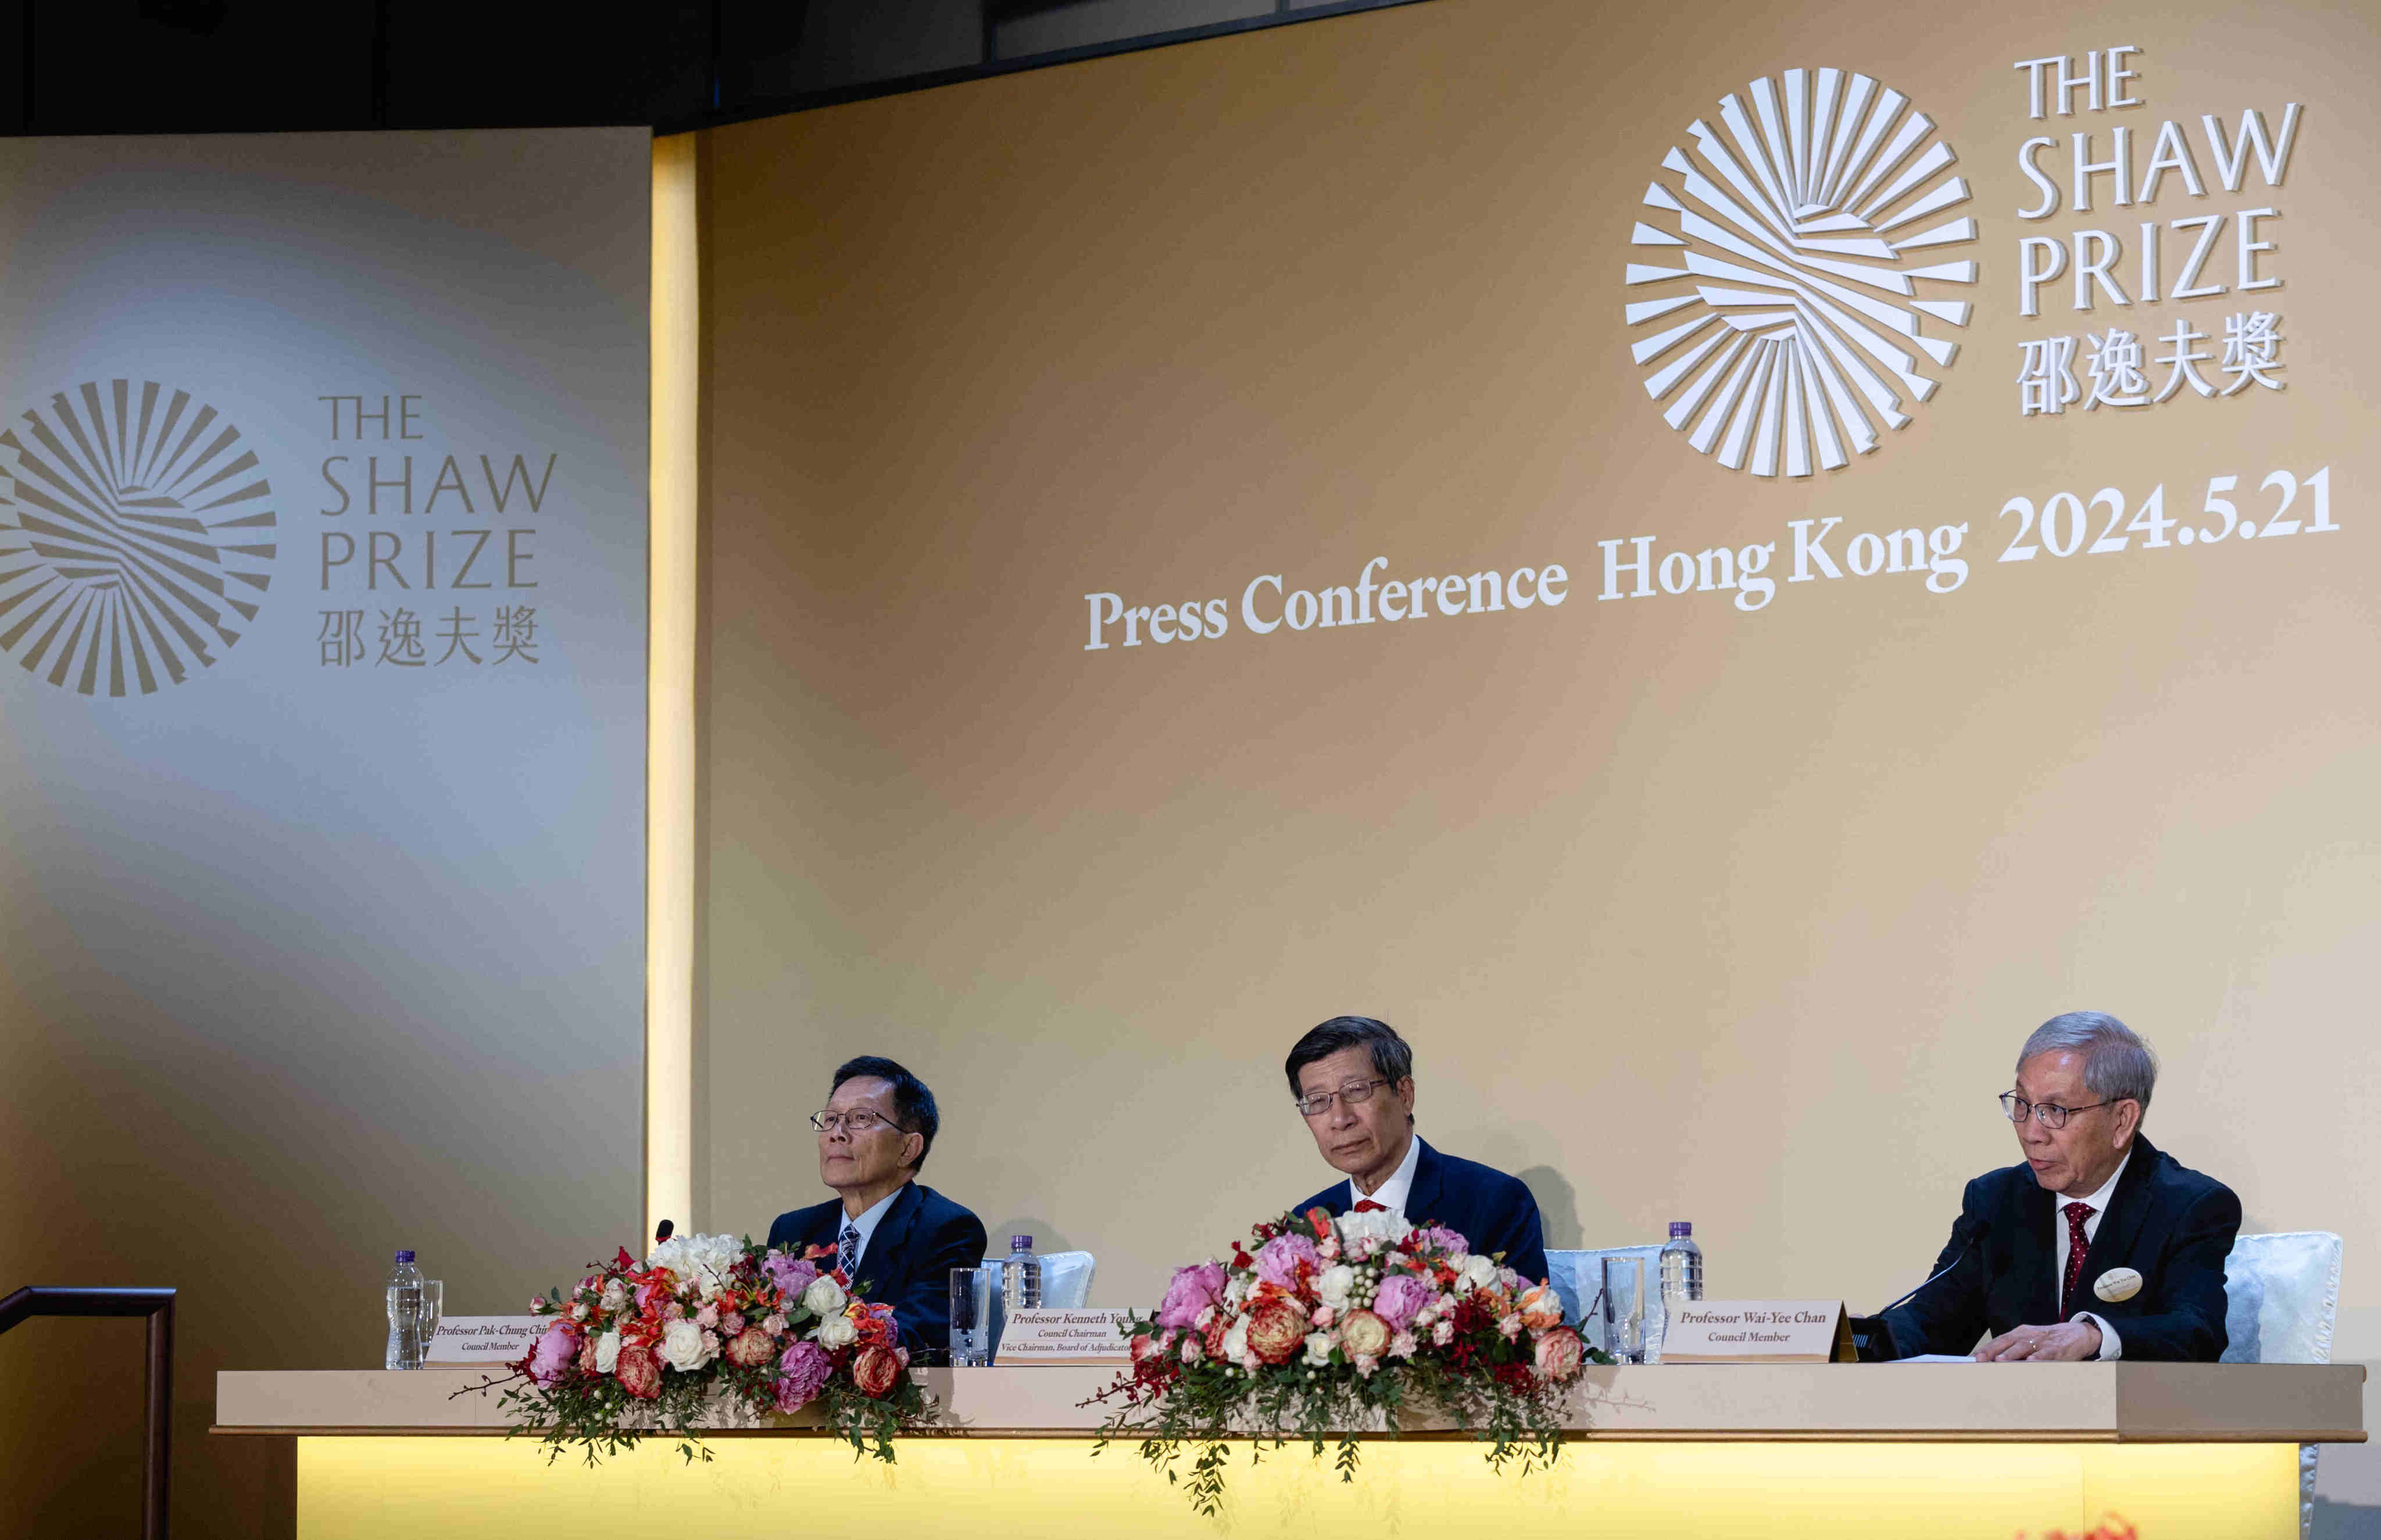 Council members of Hong Kong’s Shaw Prize announce the winners of the award. Photo: Edmond So